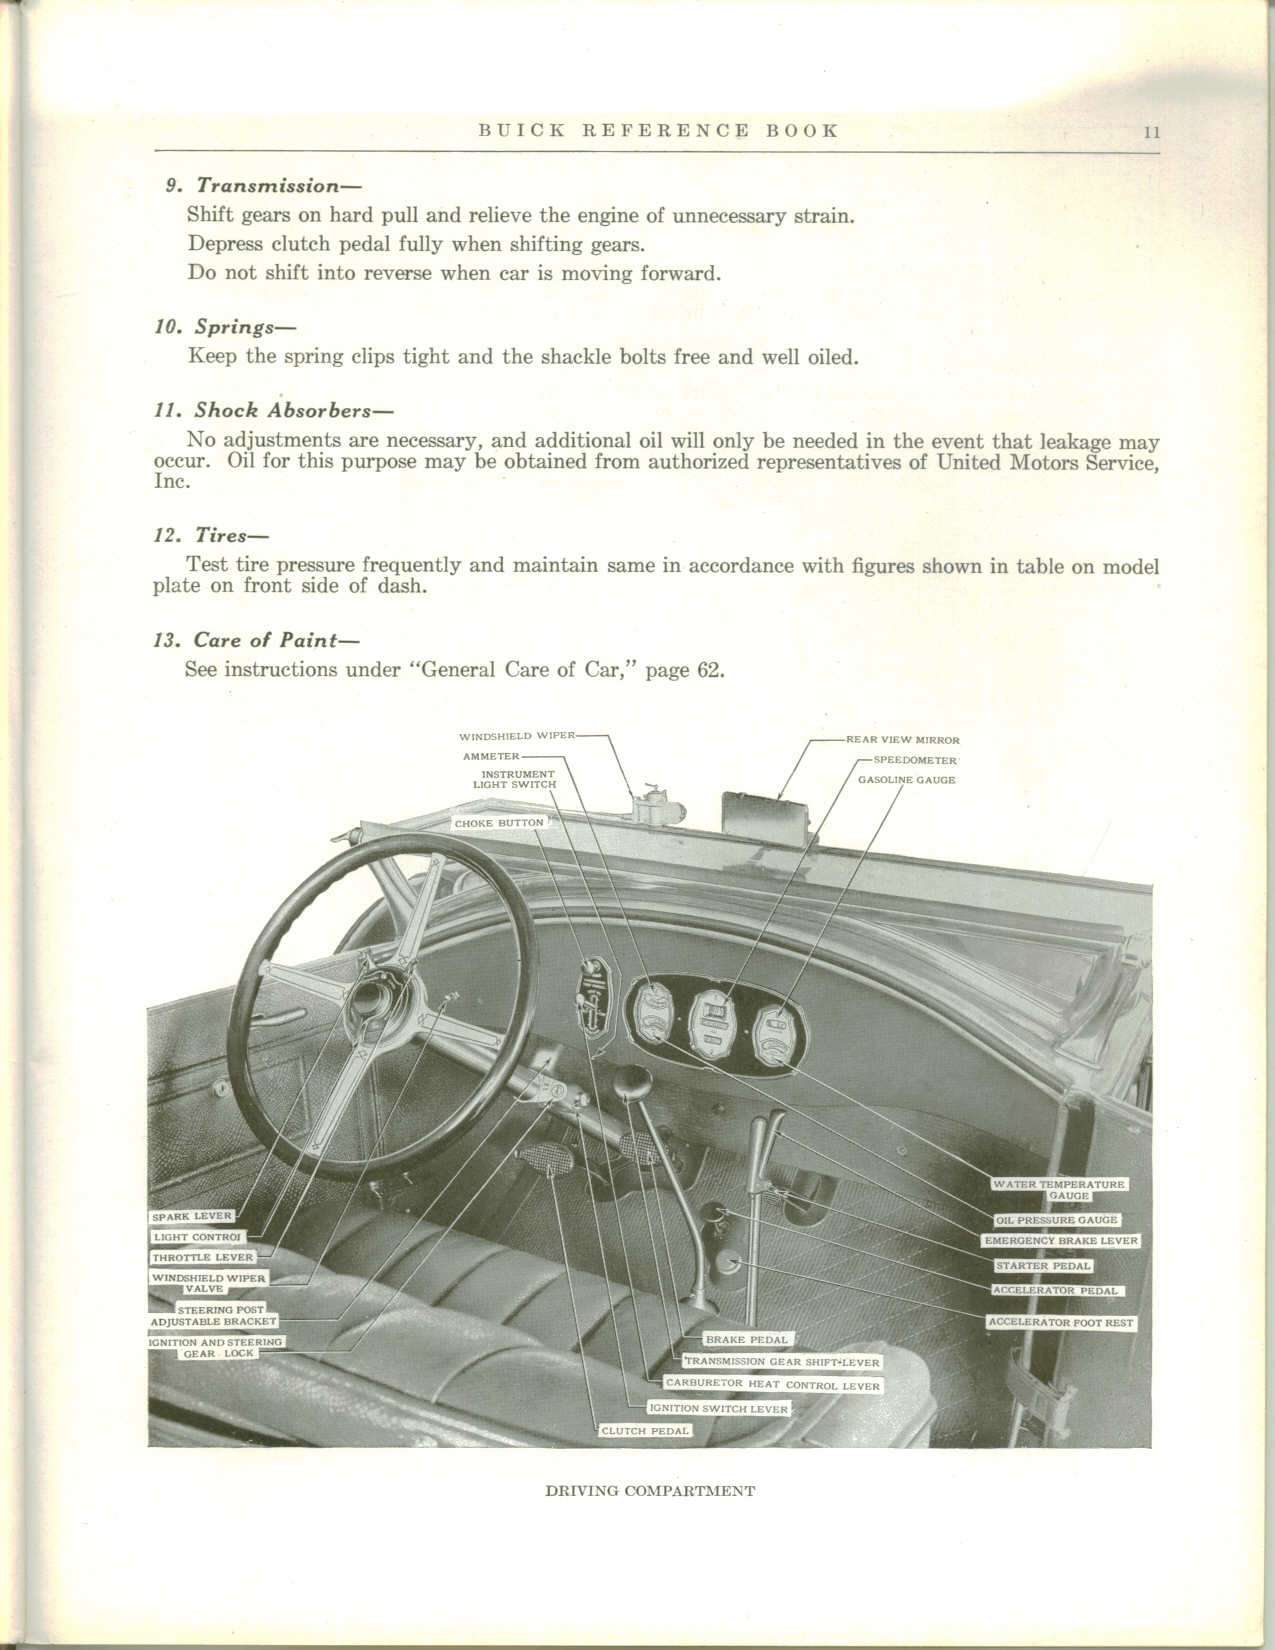 1928 Buick Reference Book-11